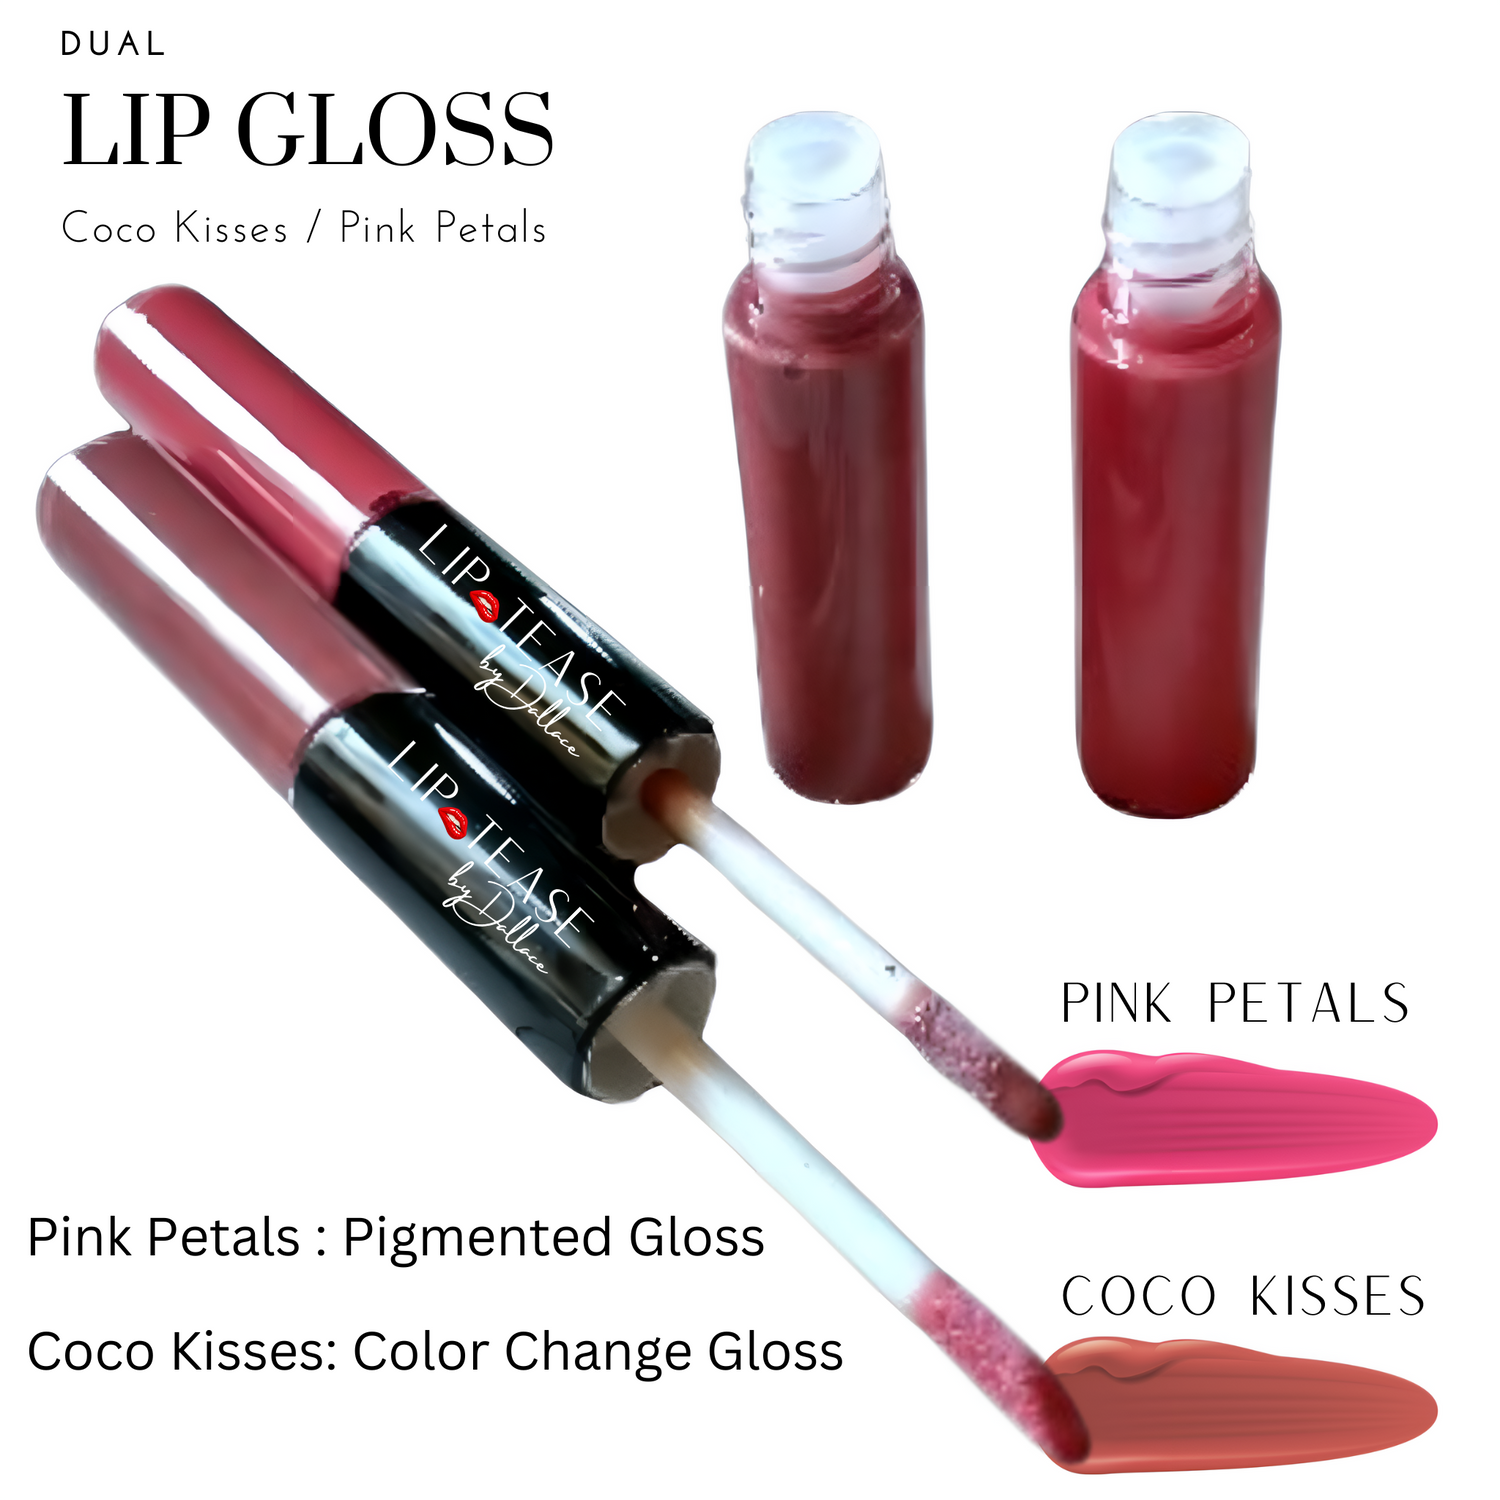 2-in-1 Color Changing Gloss Lip Gloss Lip Tease by Dallace   